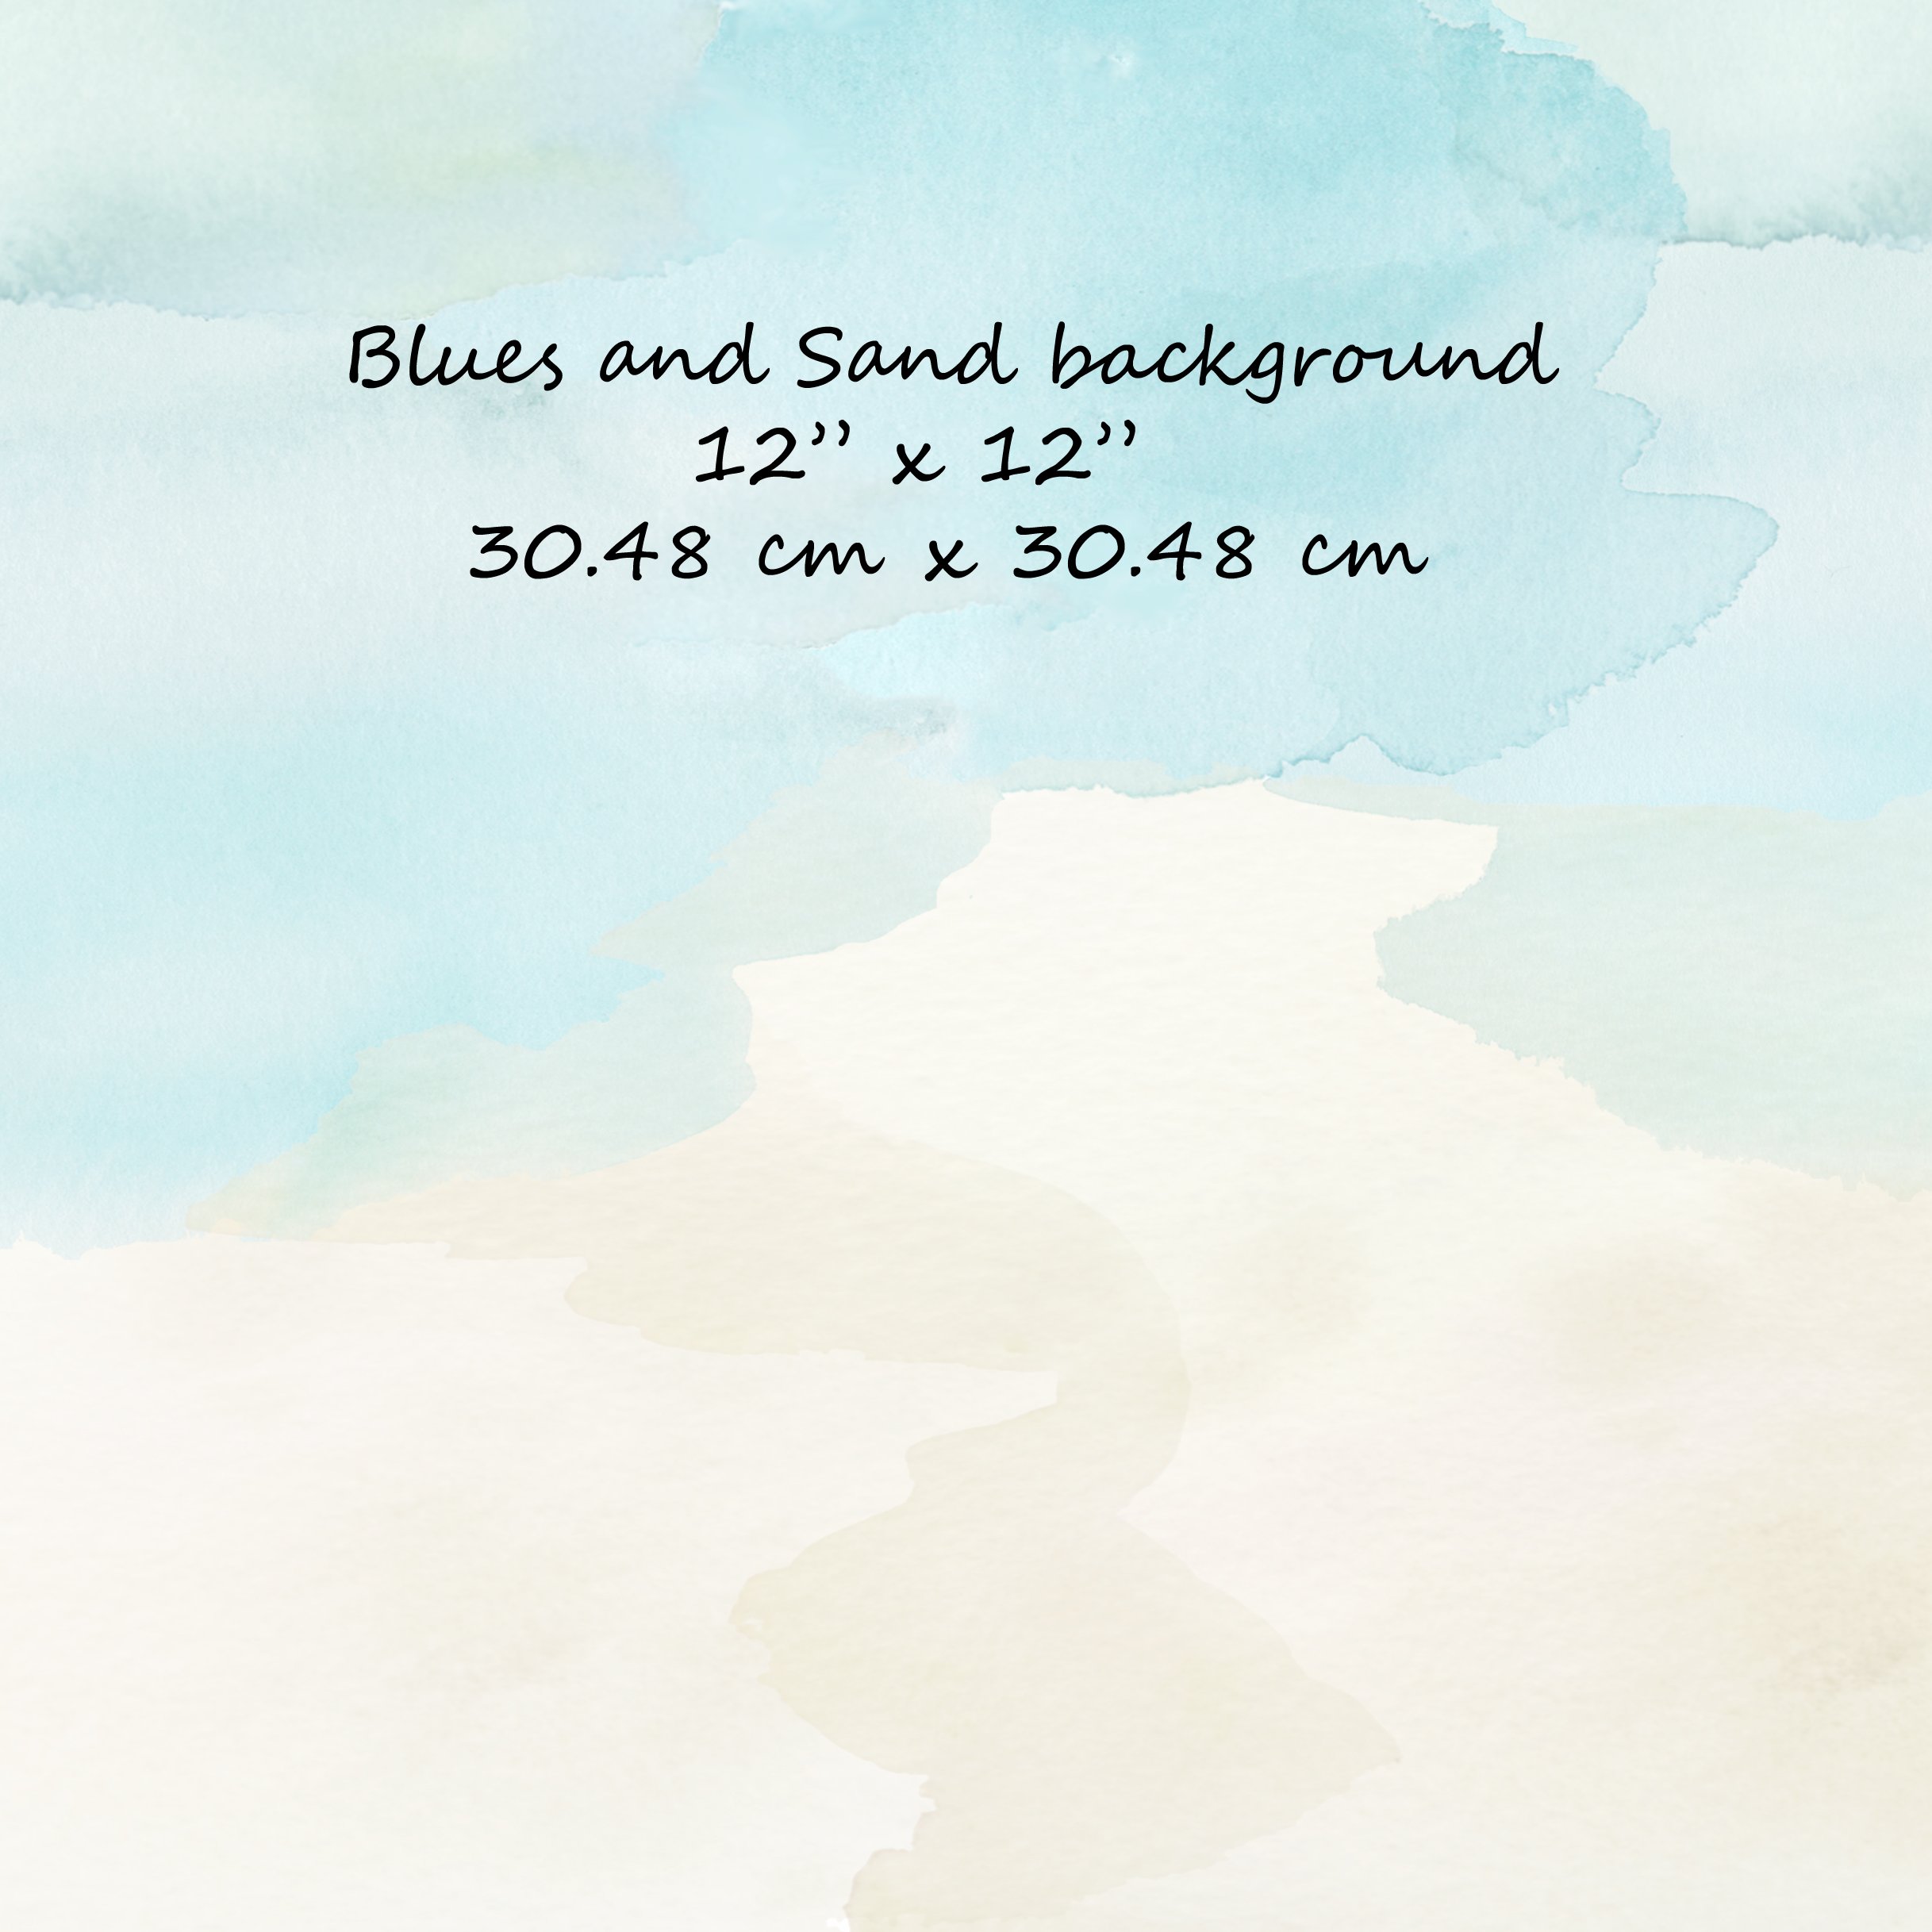 background 12 x 12 sand and blue beach listing page 974